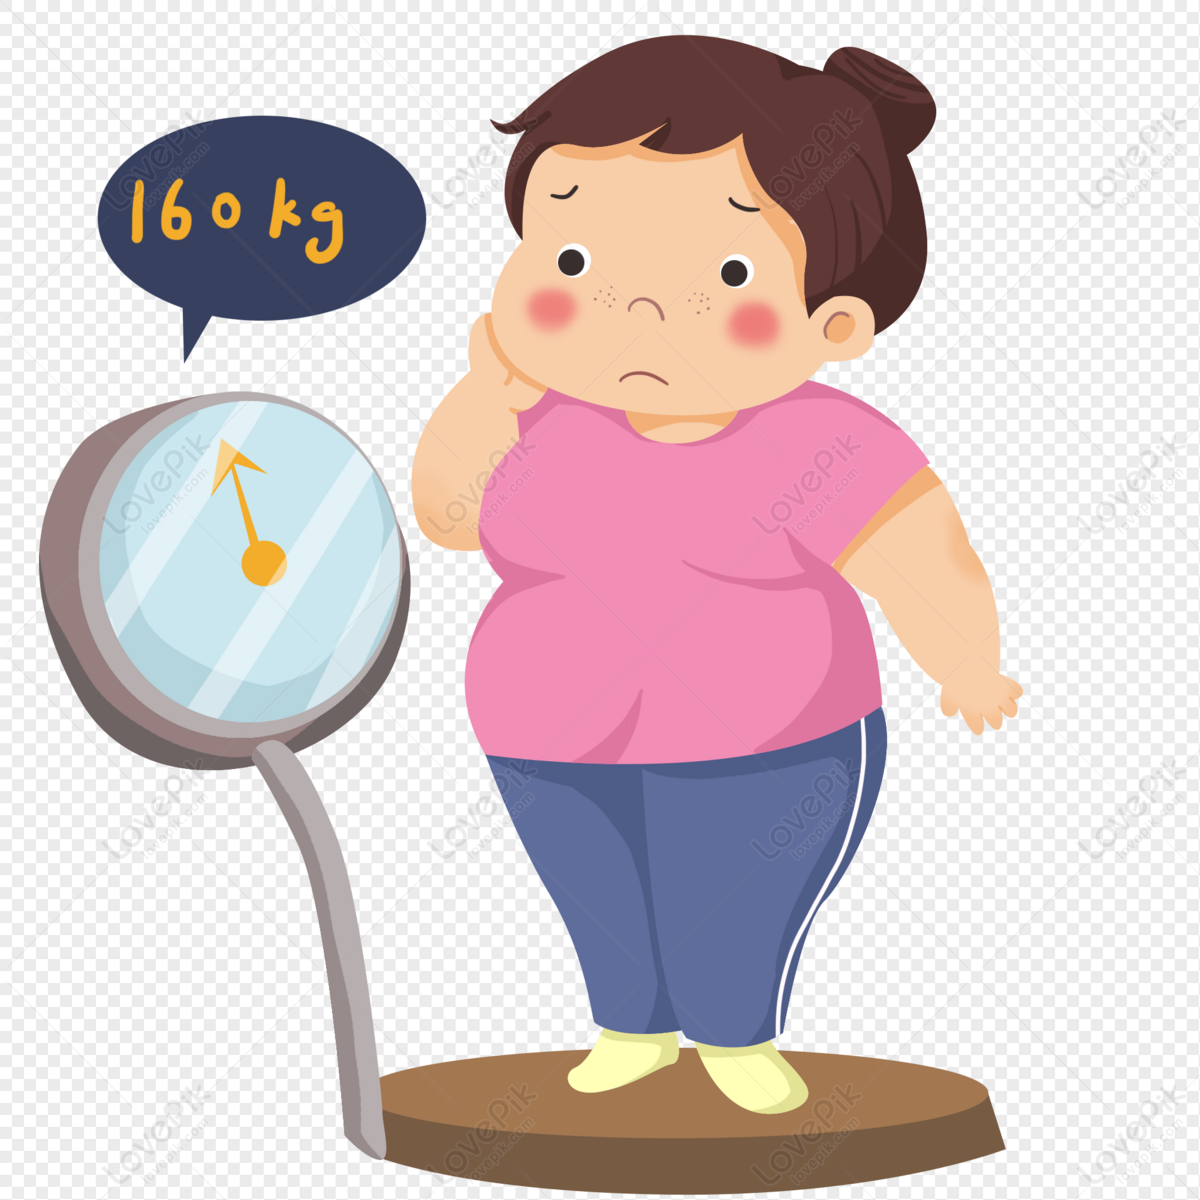 Weighing Scale PNG Picture, Weighing Scale, Love, Pink, Body Weight PNG  Image For Free Download